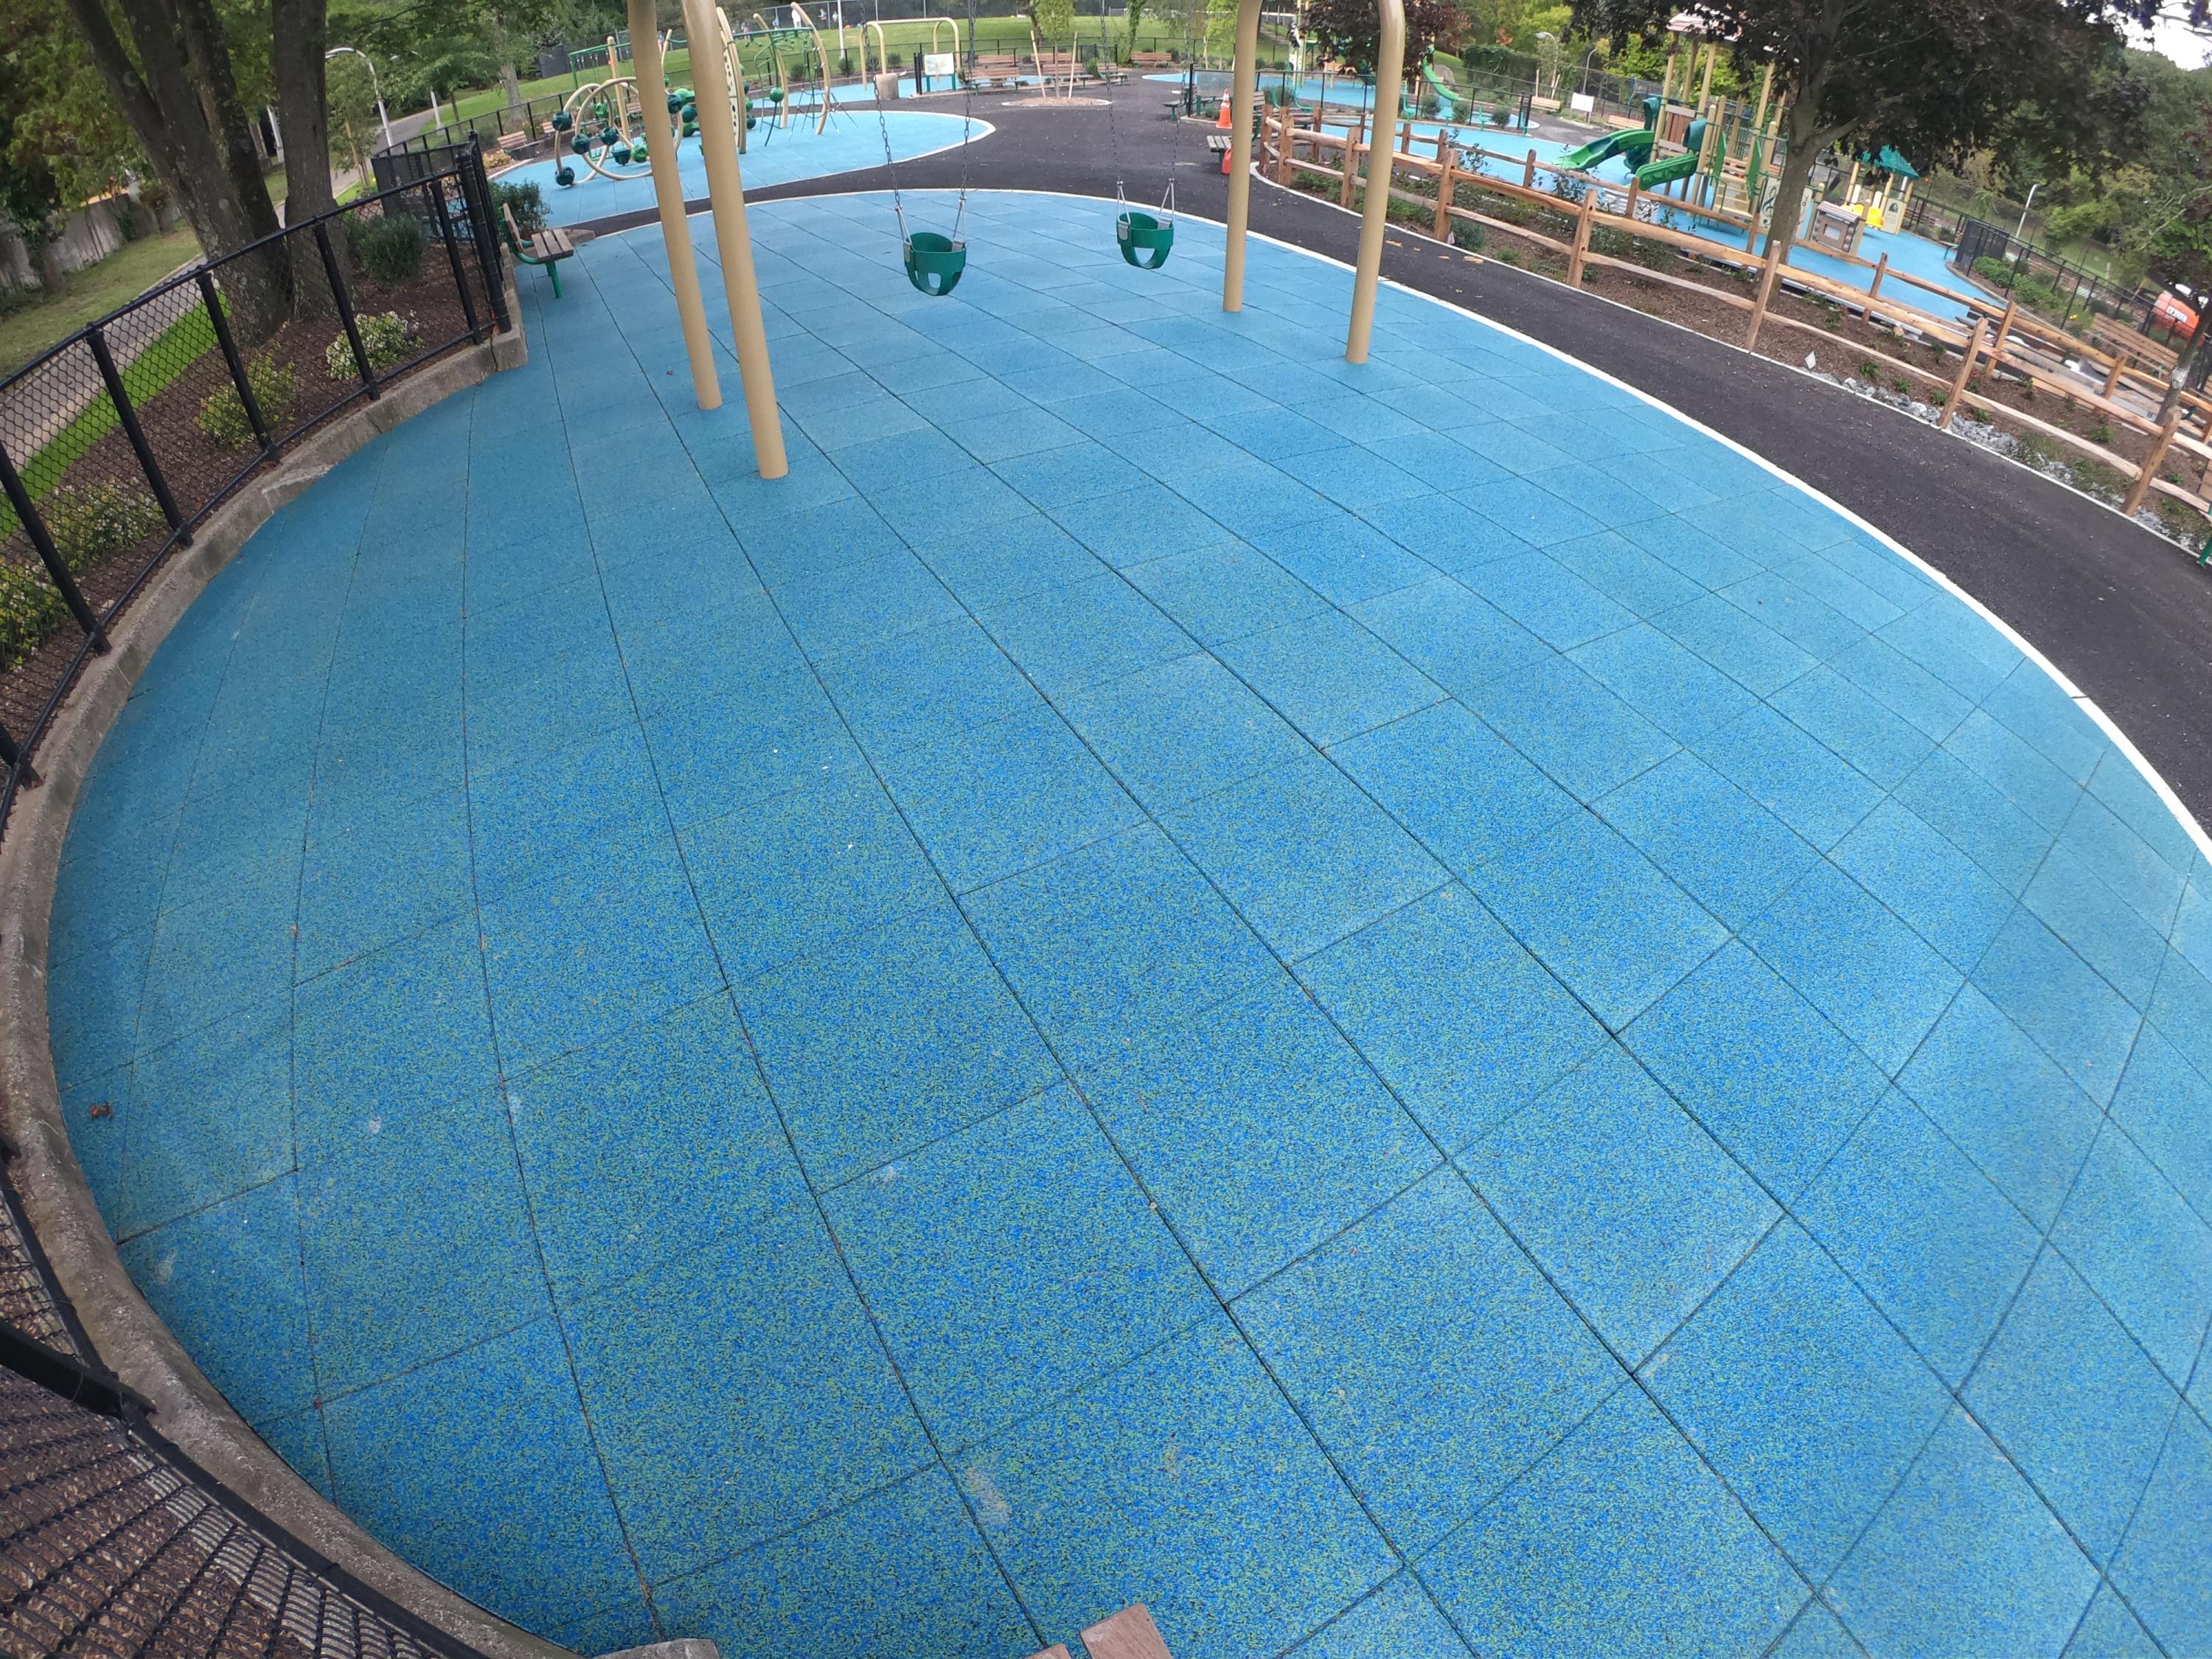 County Park Playground = Using TPV Top Tiles w50% Blue 45% Green 5% Black f